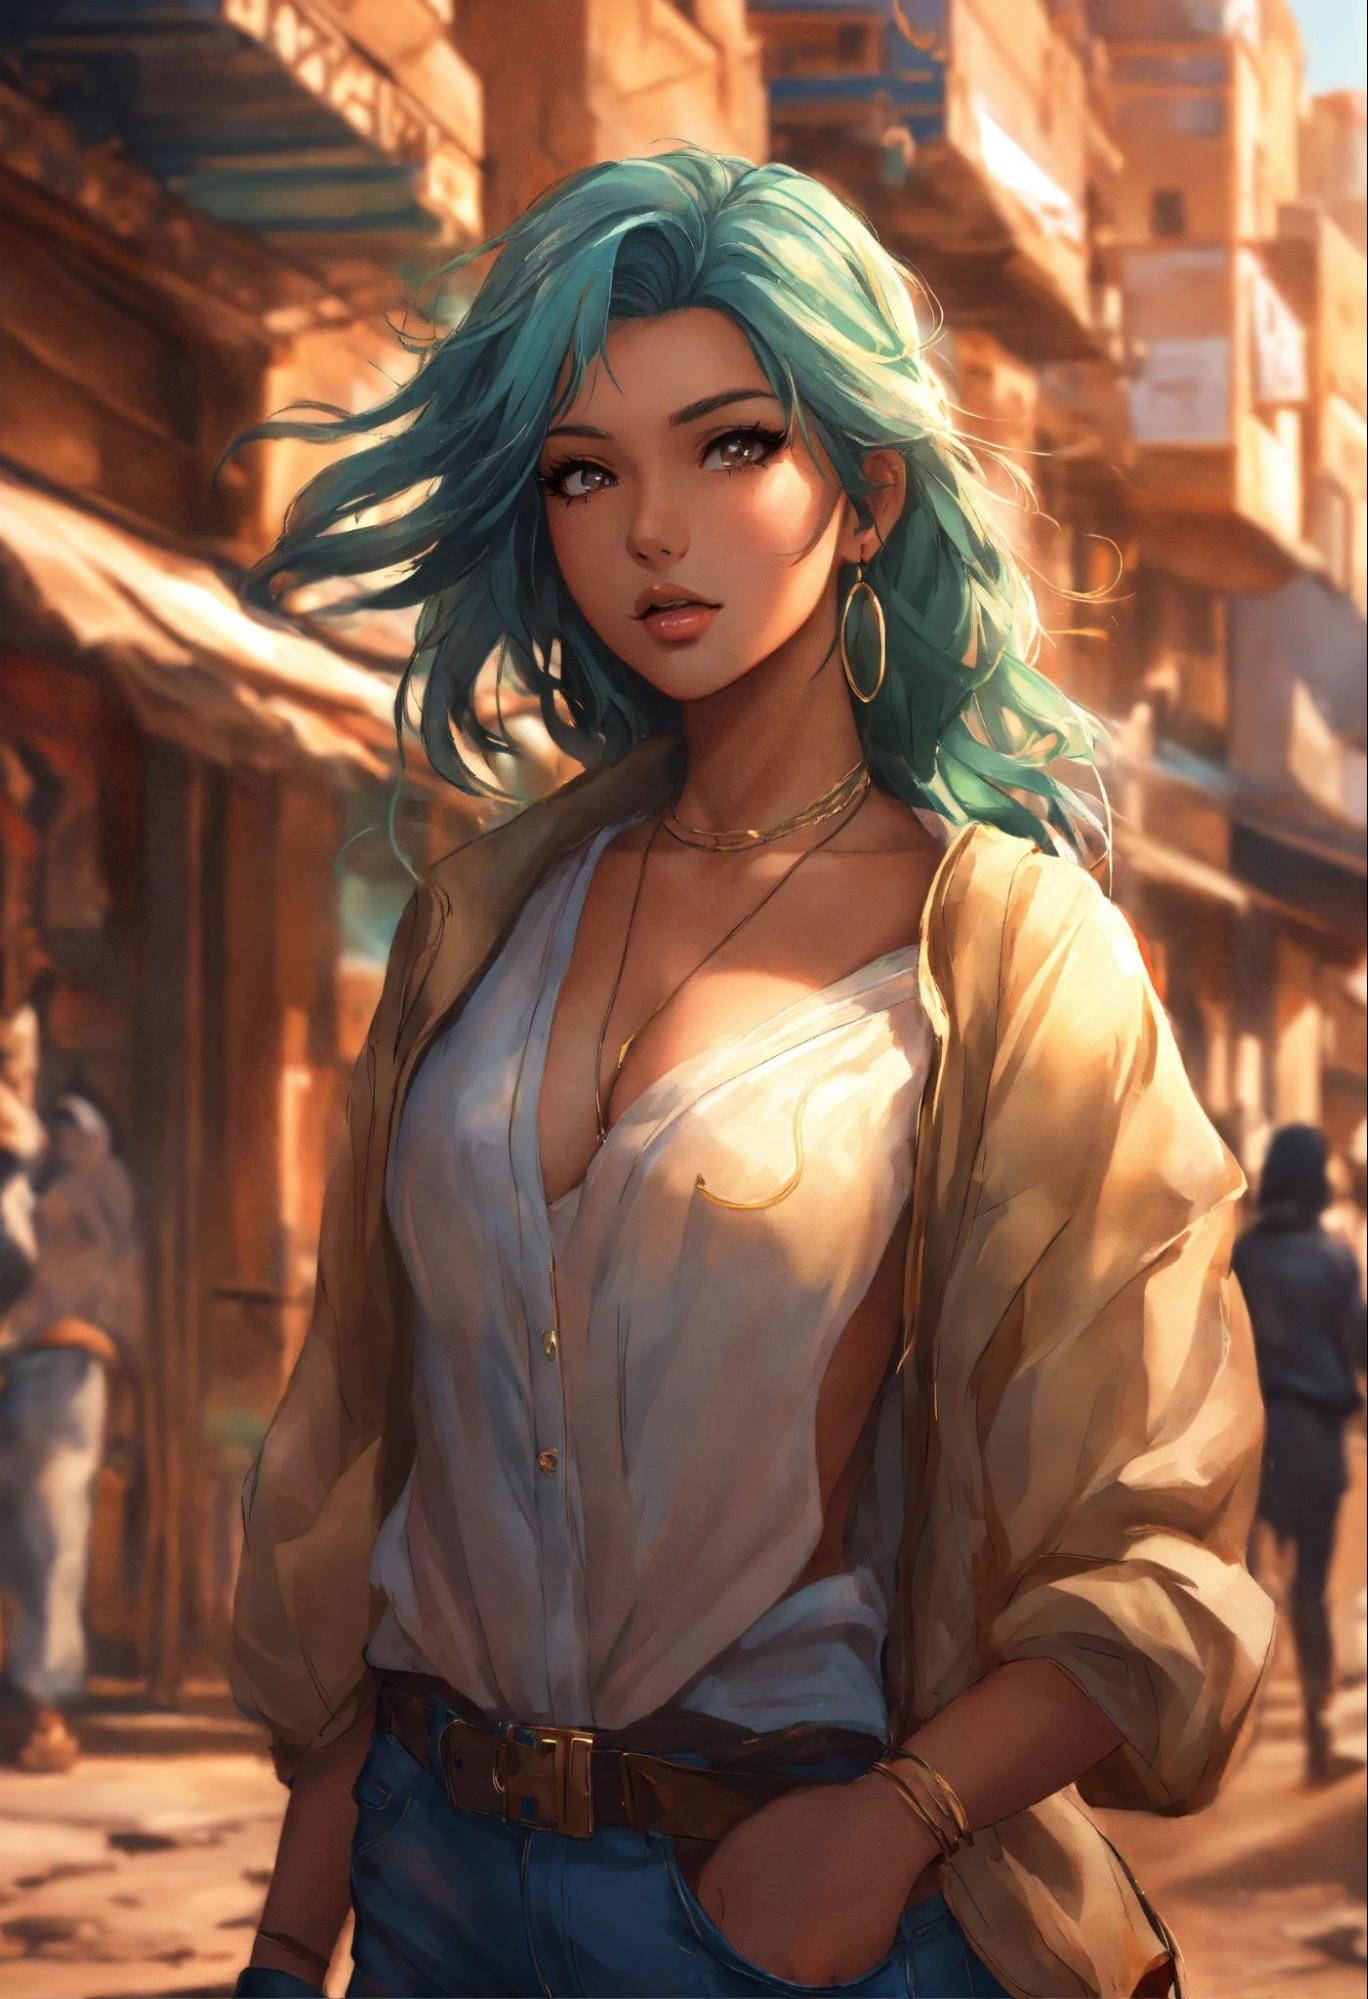 Anime girl in the streets of a city